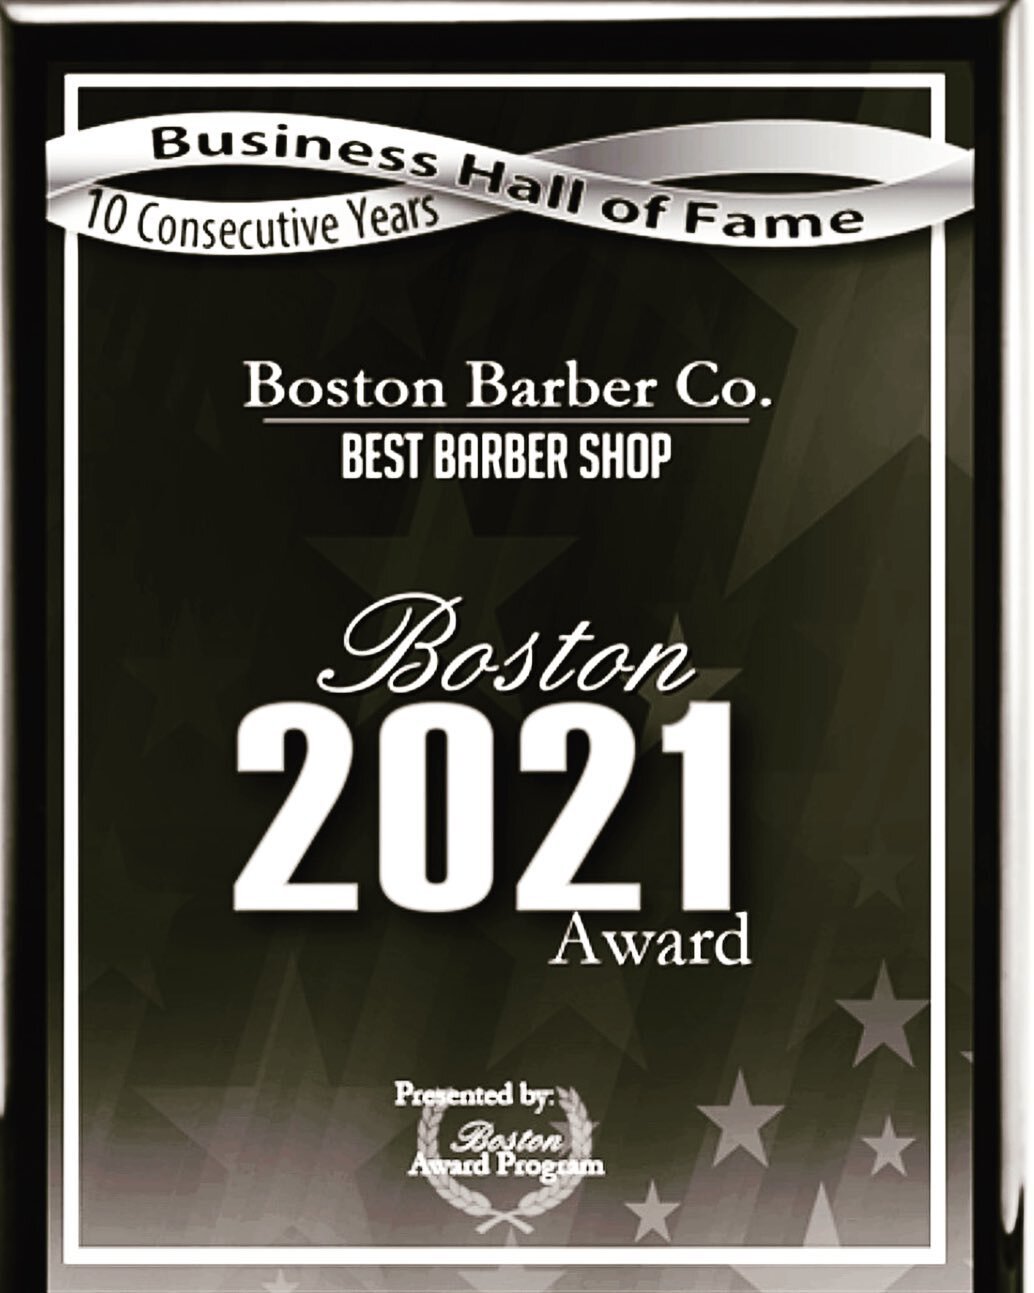 10 yrs in a row. Not a bad run. #bestofboston #bestbarbershop #bestbostonbarber #boston #northend #beaconhill 
Make an appointment today to see what you&rsquo;re missing!